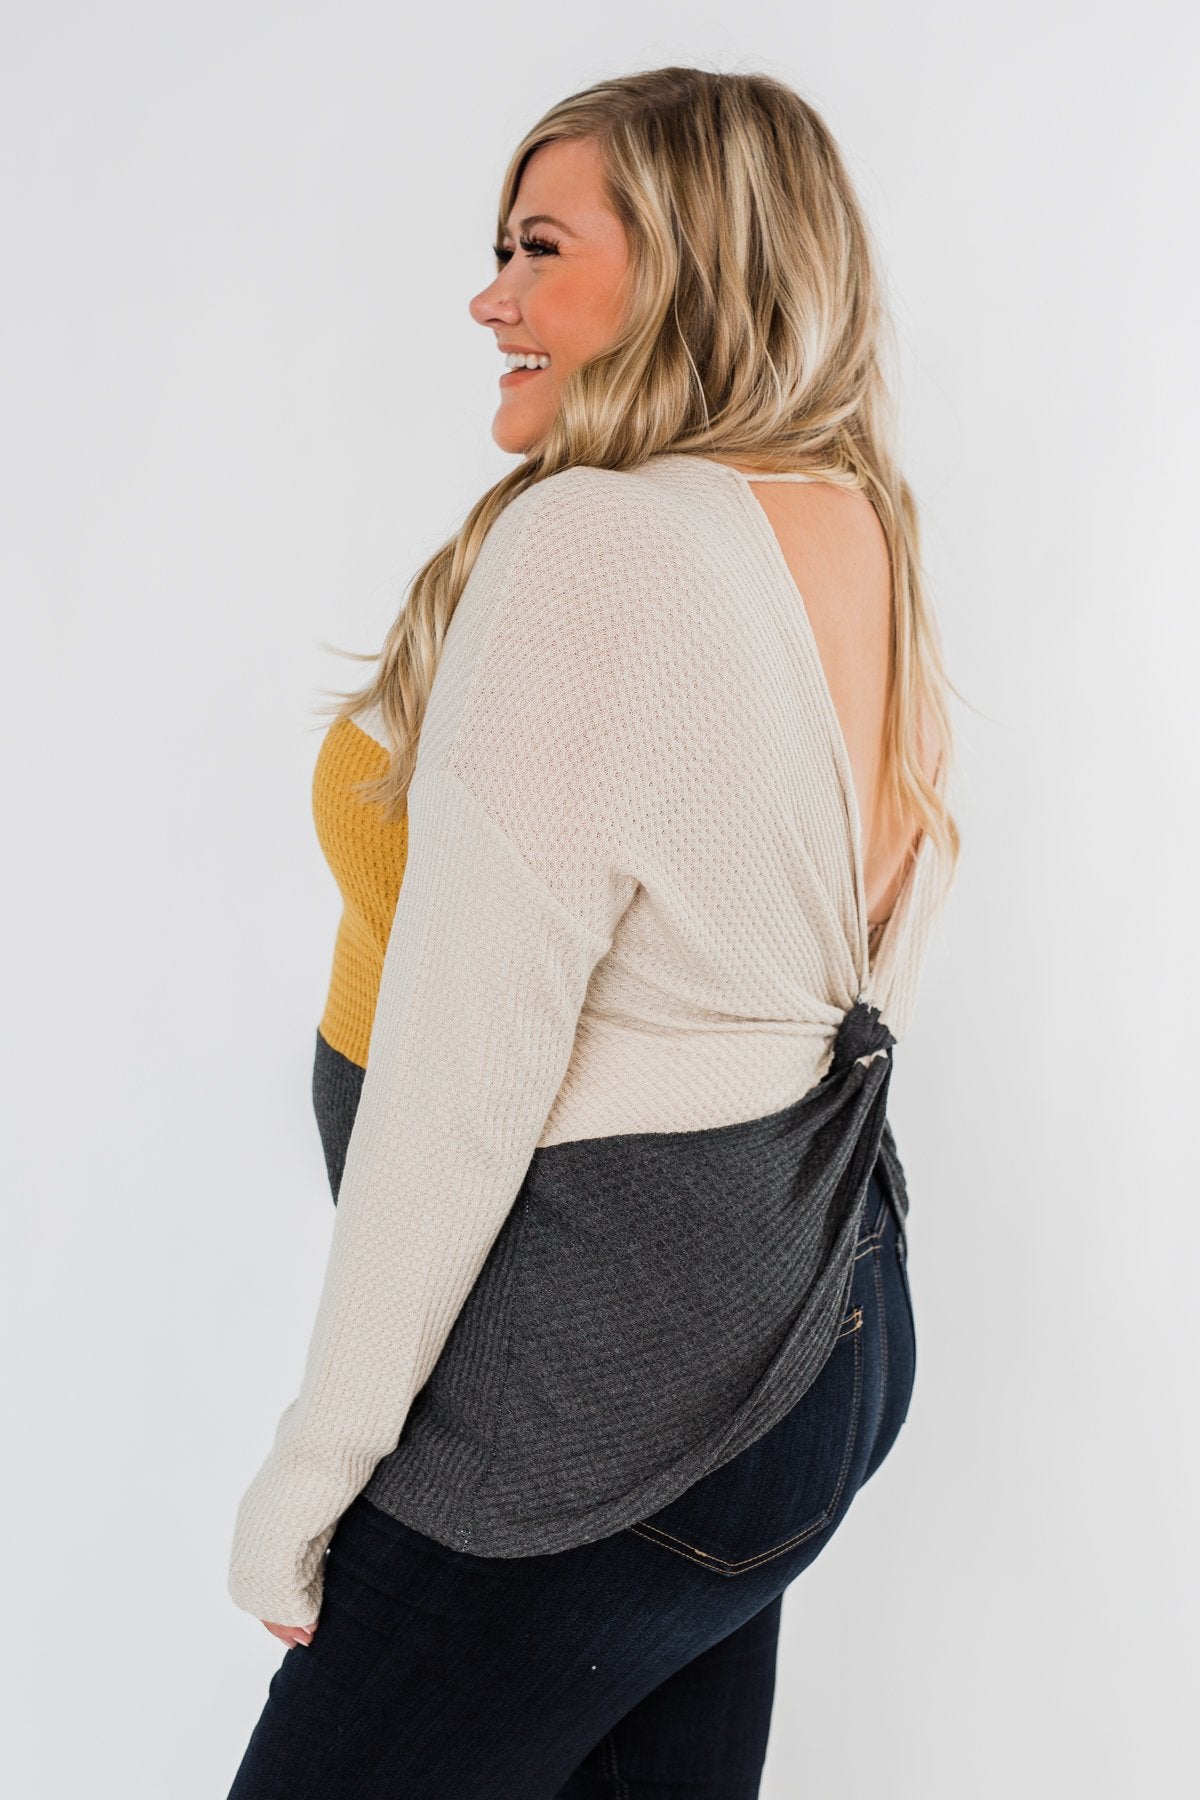 Away We Go Color Block Waffle Knit Top- Mustard & Charcoal